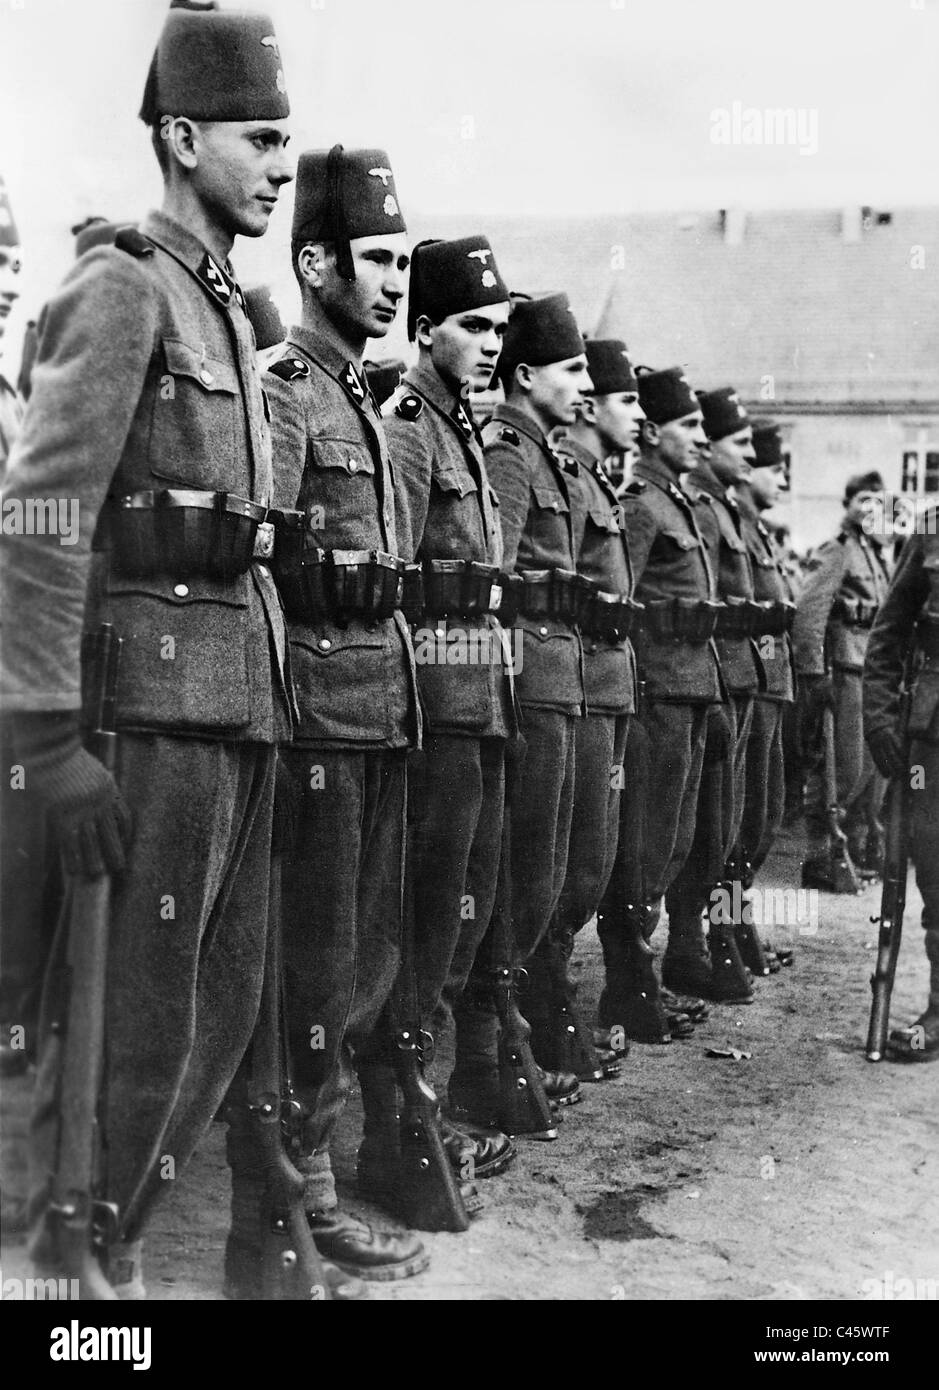 Bosnian soldiers of the weapon SS, 1943 Stock Photo